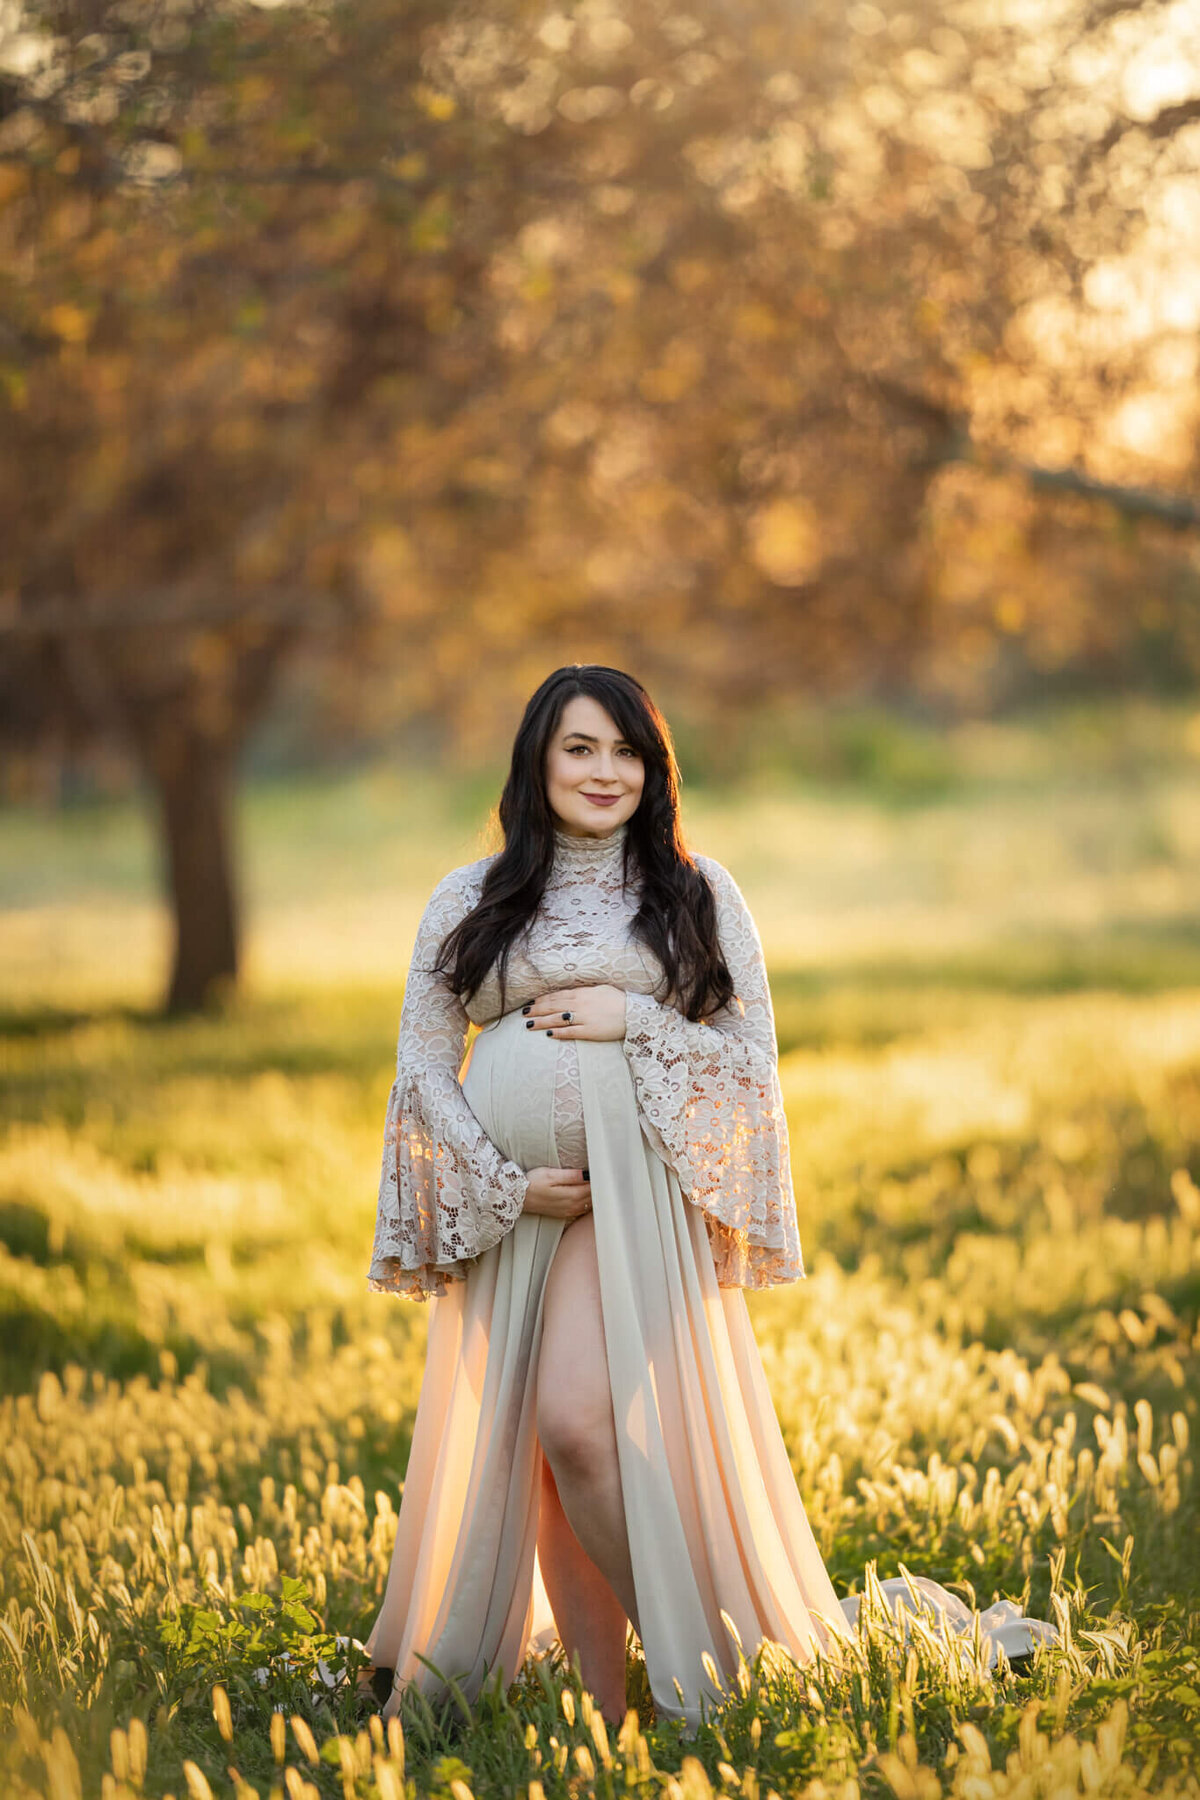 maternity photoshoot at the park at sunset with a golden sunset backlight